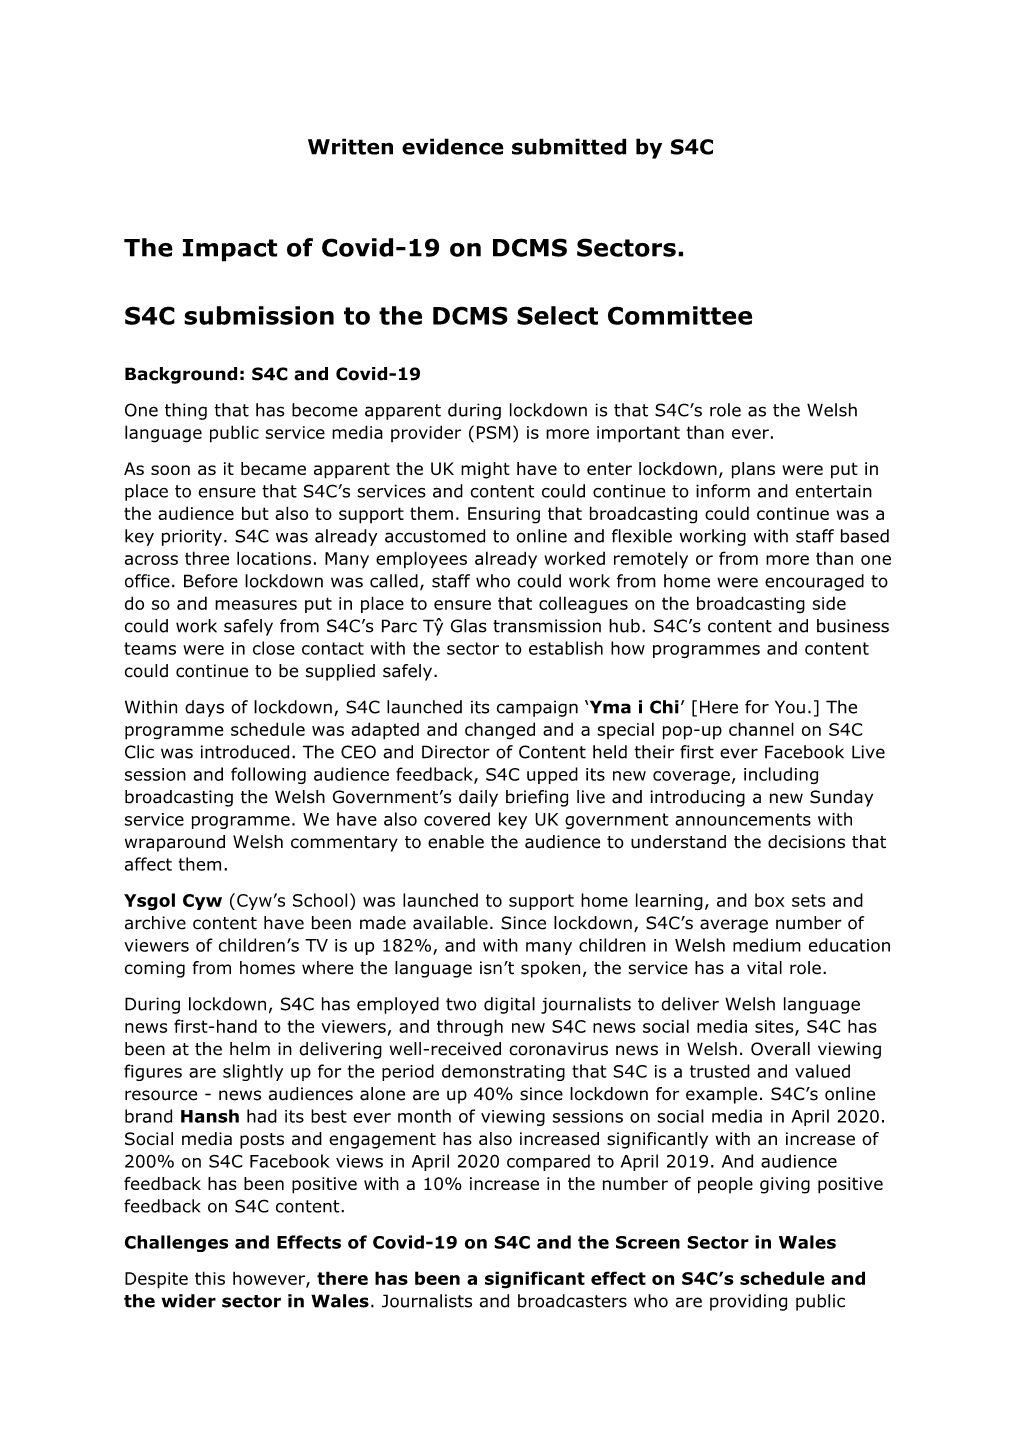 The Impact of Covid-19 on DCMS Sectors. S4C Submission to The